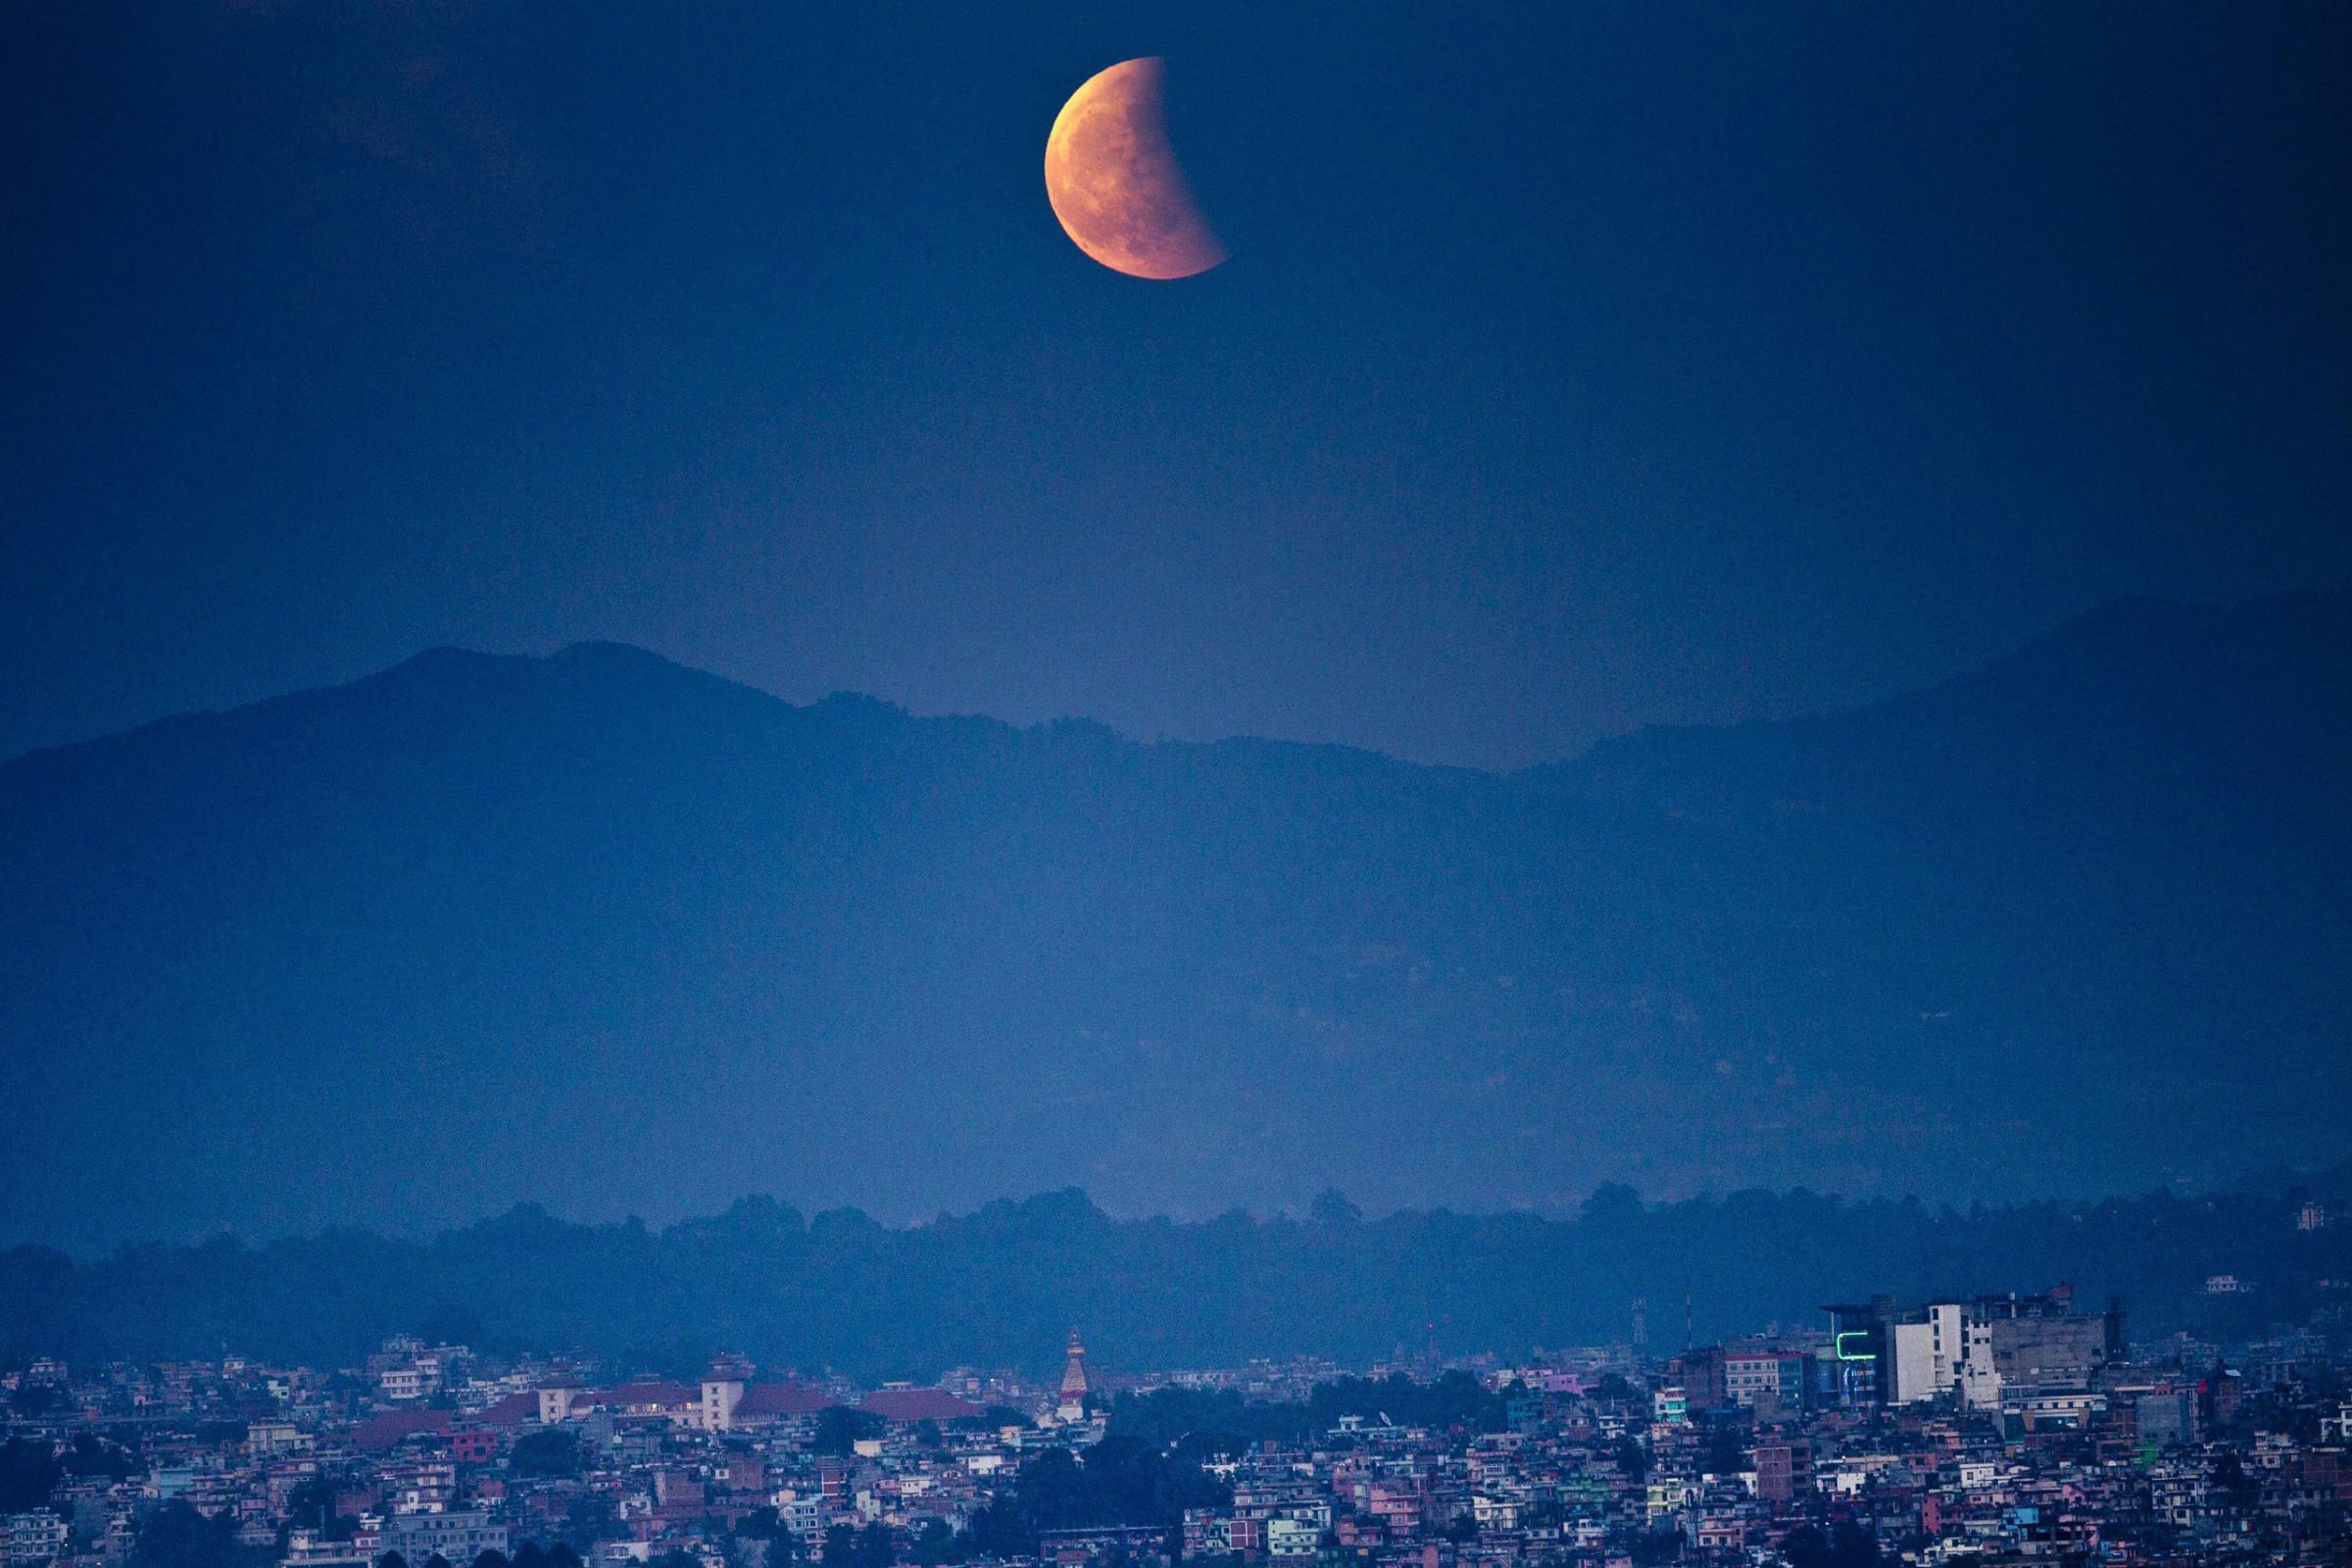 The moon during a total lunar eclipse from Kathmandu on Oct. 8, 2014.